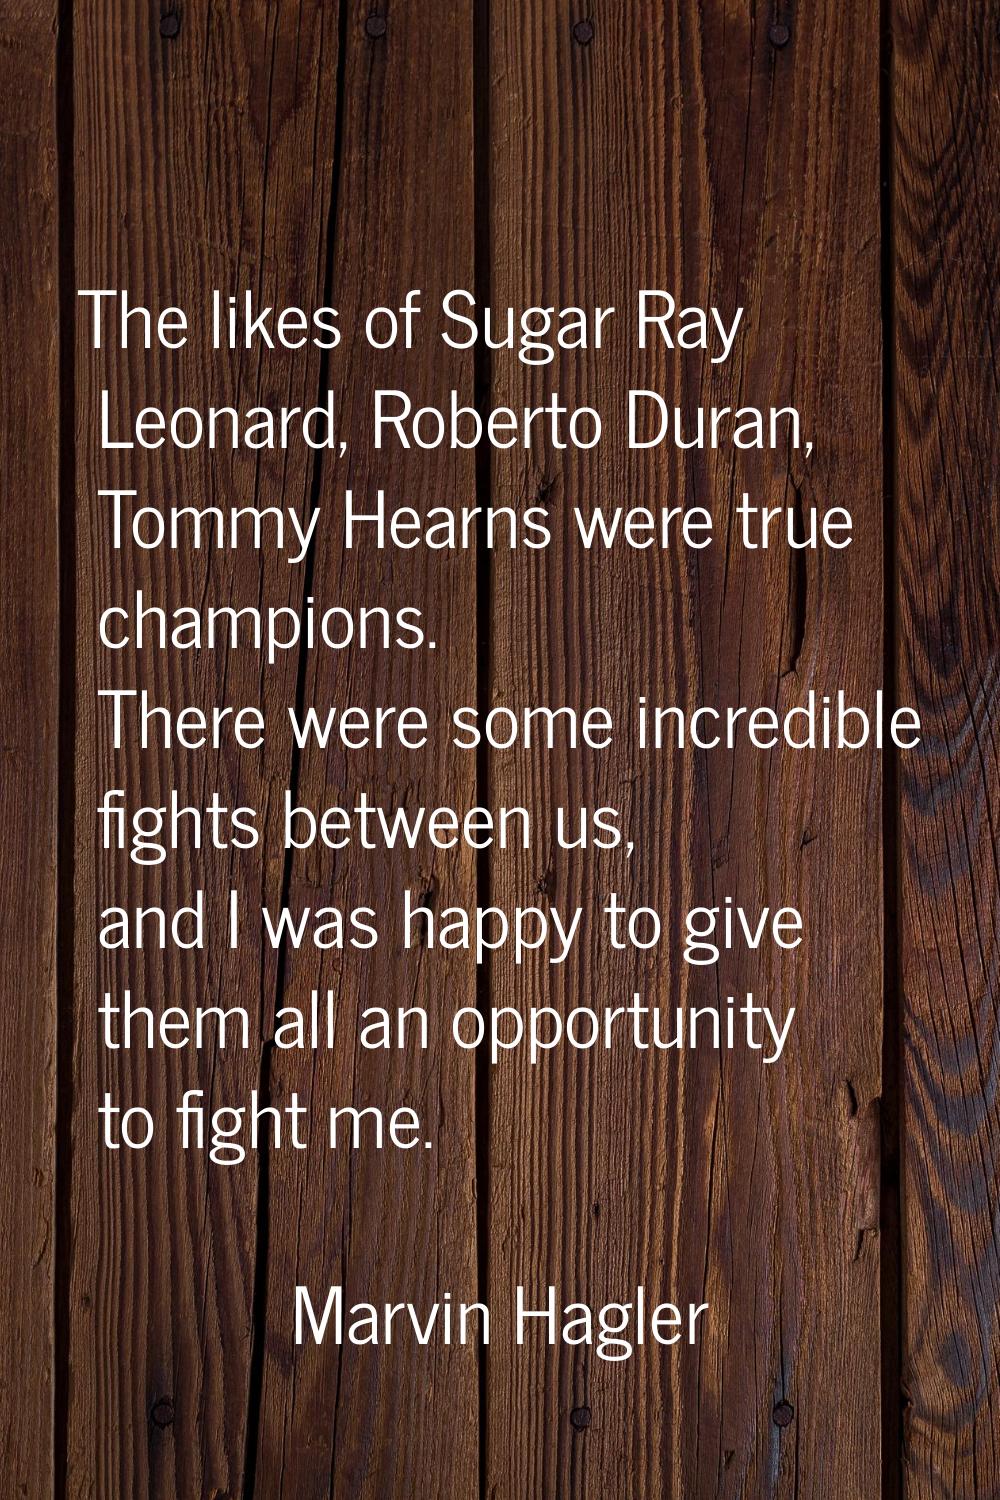 The likes of Sugar Ray Leonard, Roberto Duran, Tommy Hearns were true champions. There were some in